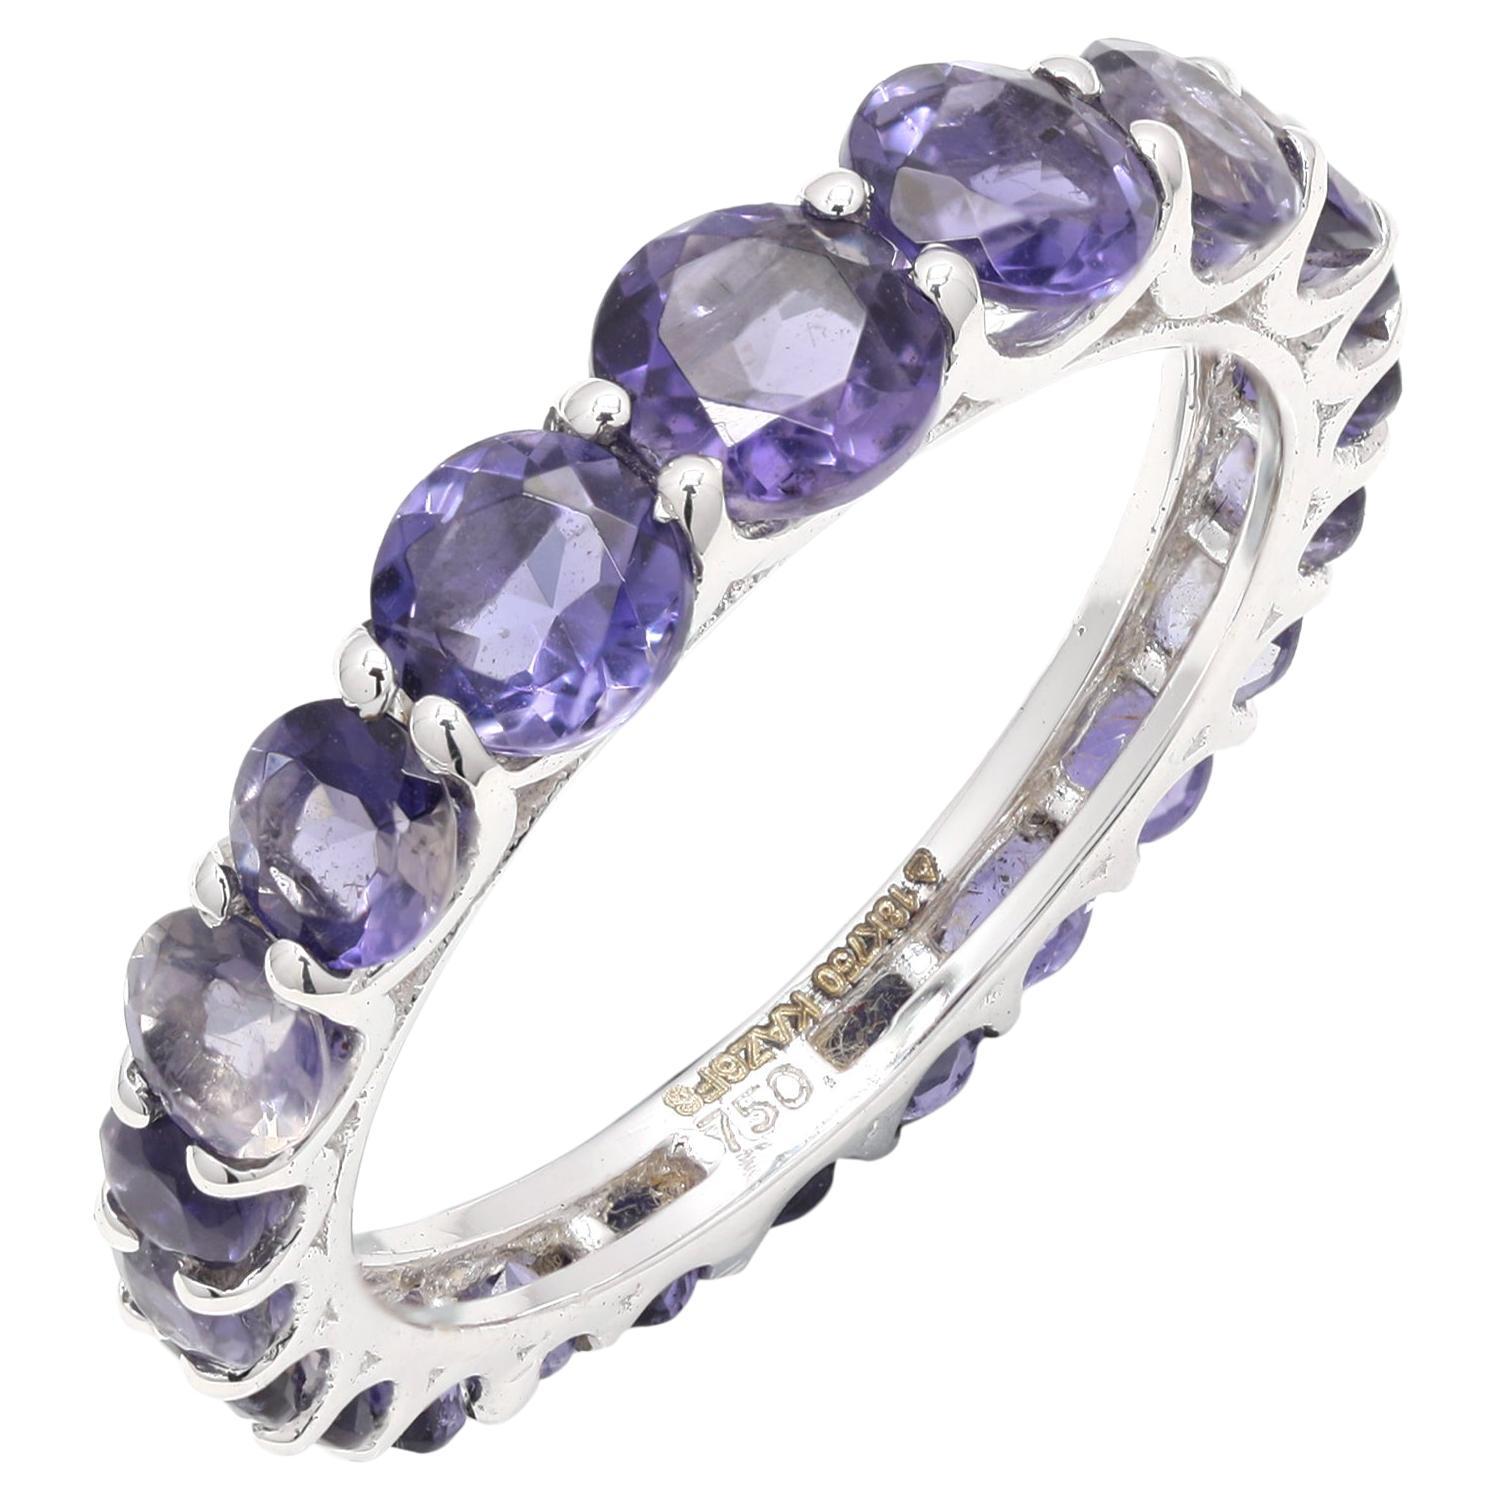 For Sale:  Stackable Eternity 2.27ct Iolite Gemstone Band Ring in 18k White Gold Settings